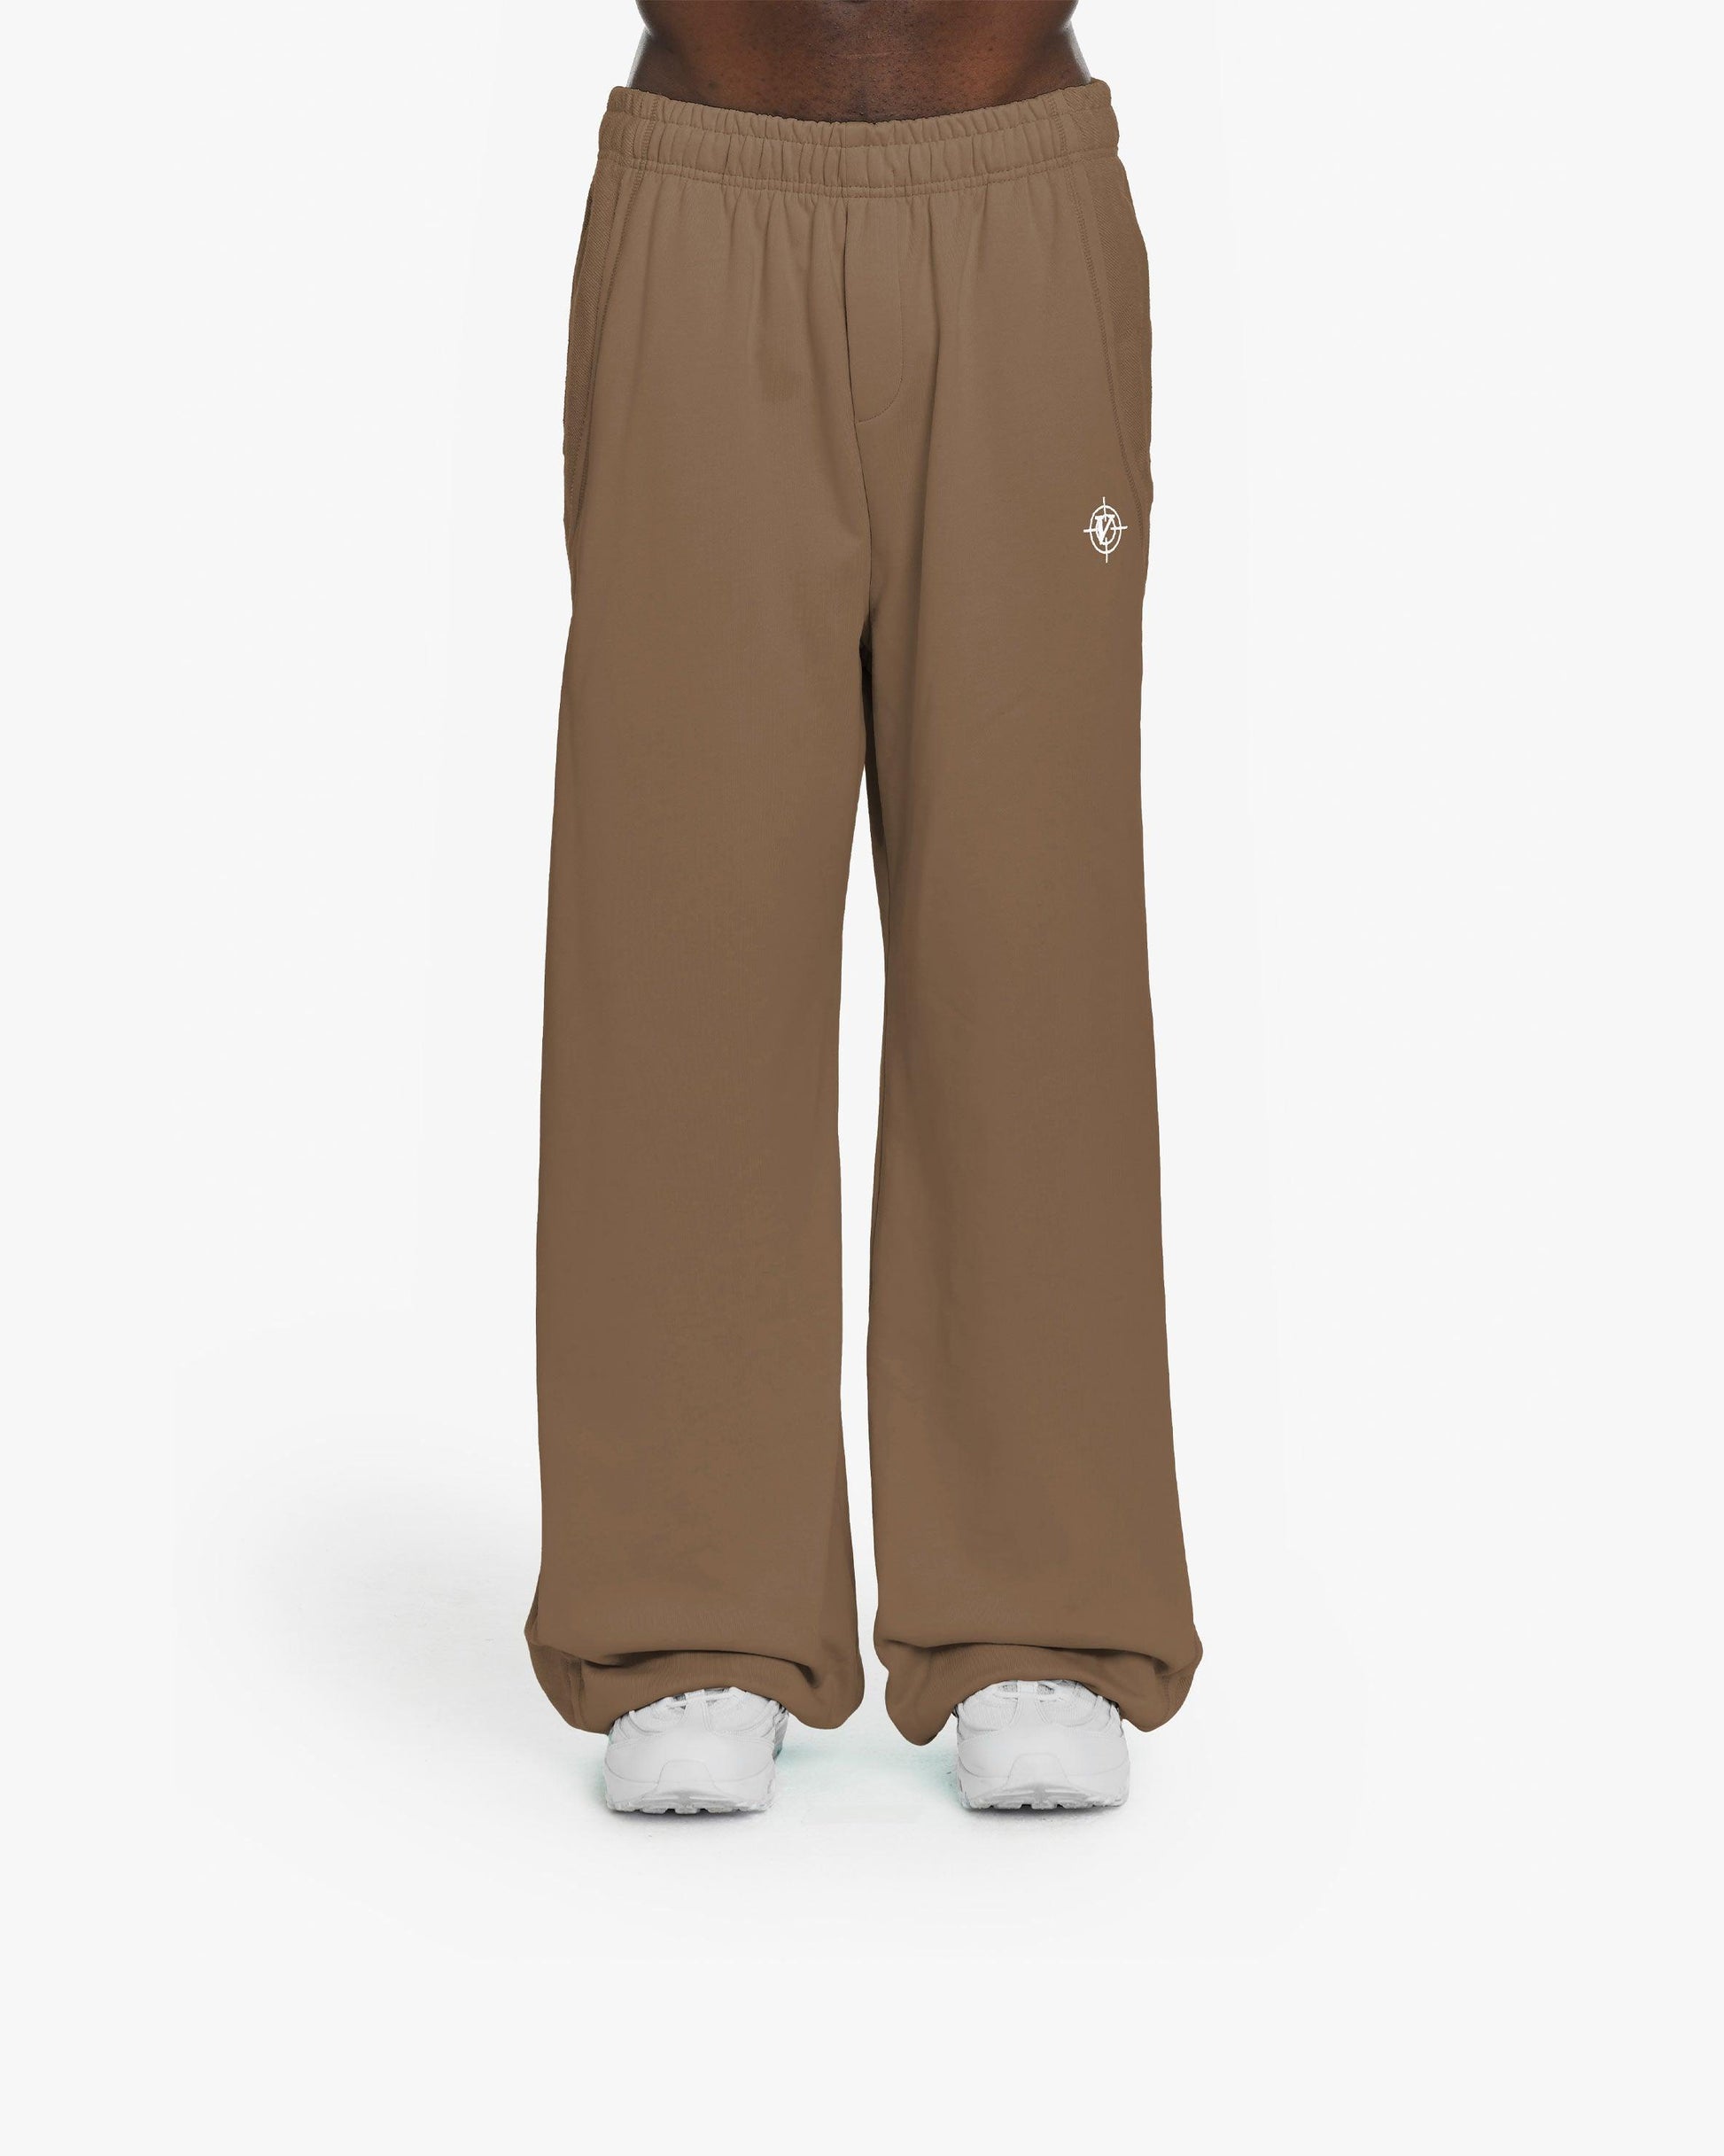 INSIDE OUT JOGGER CHOCOLATE BROWN - VICINITY